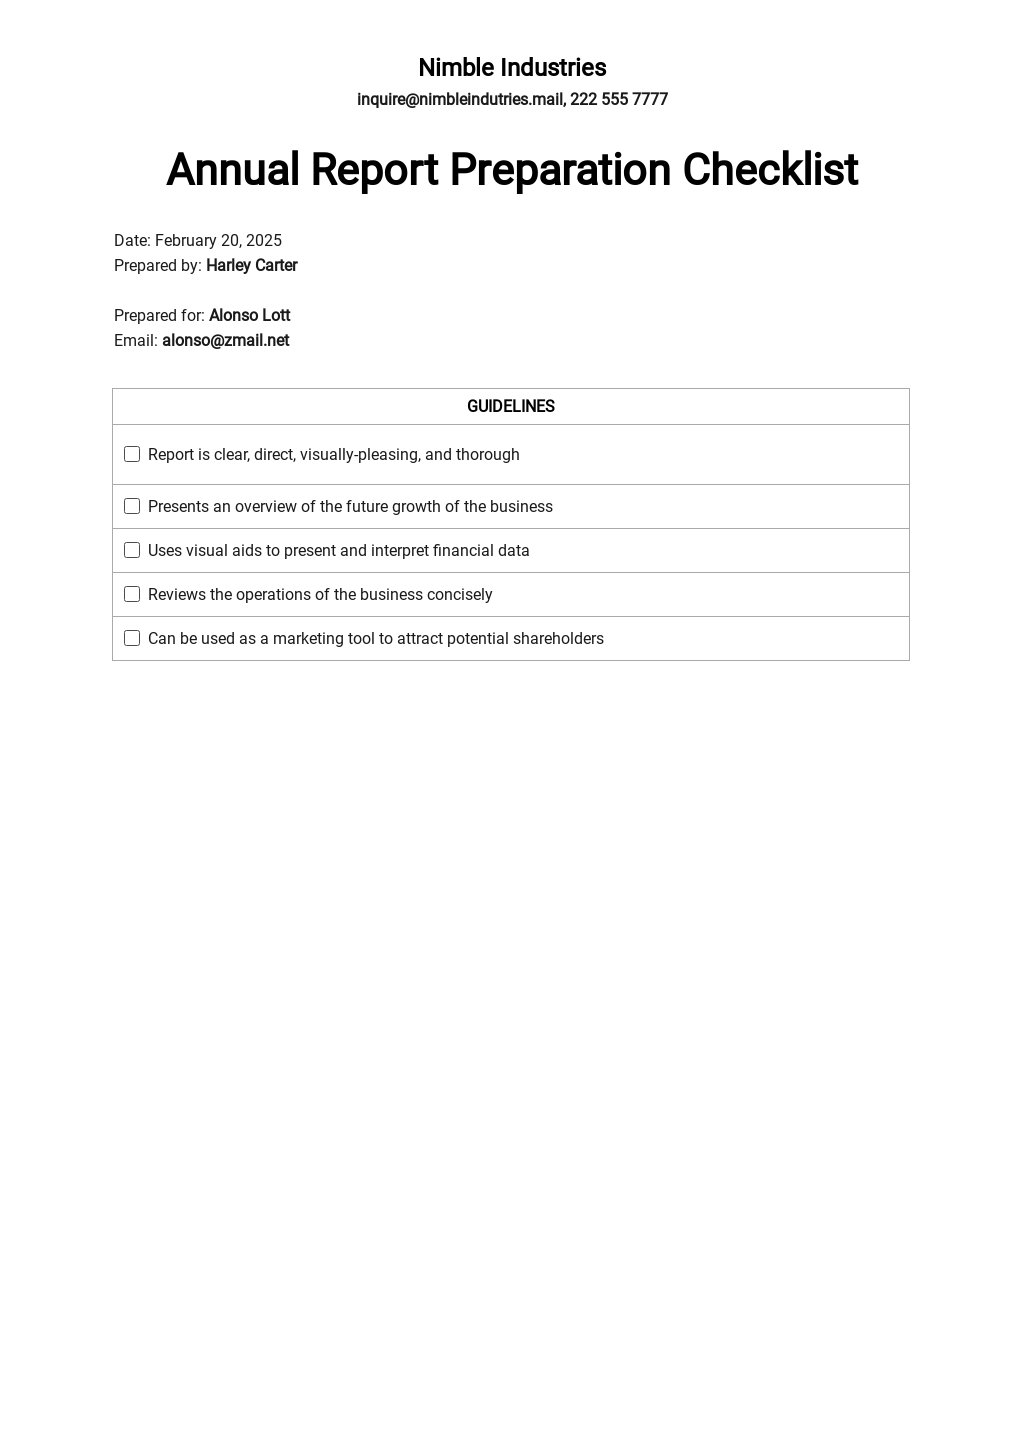 Checklist Dealing with Shareholders and Investors Template.jpe